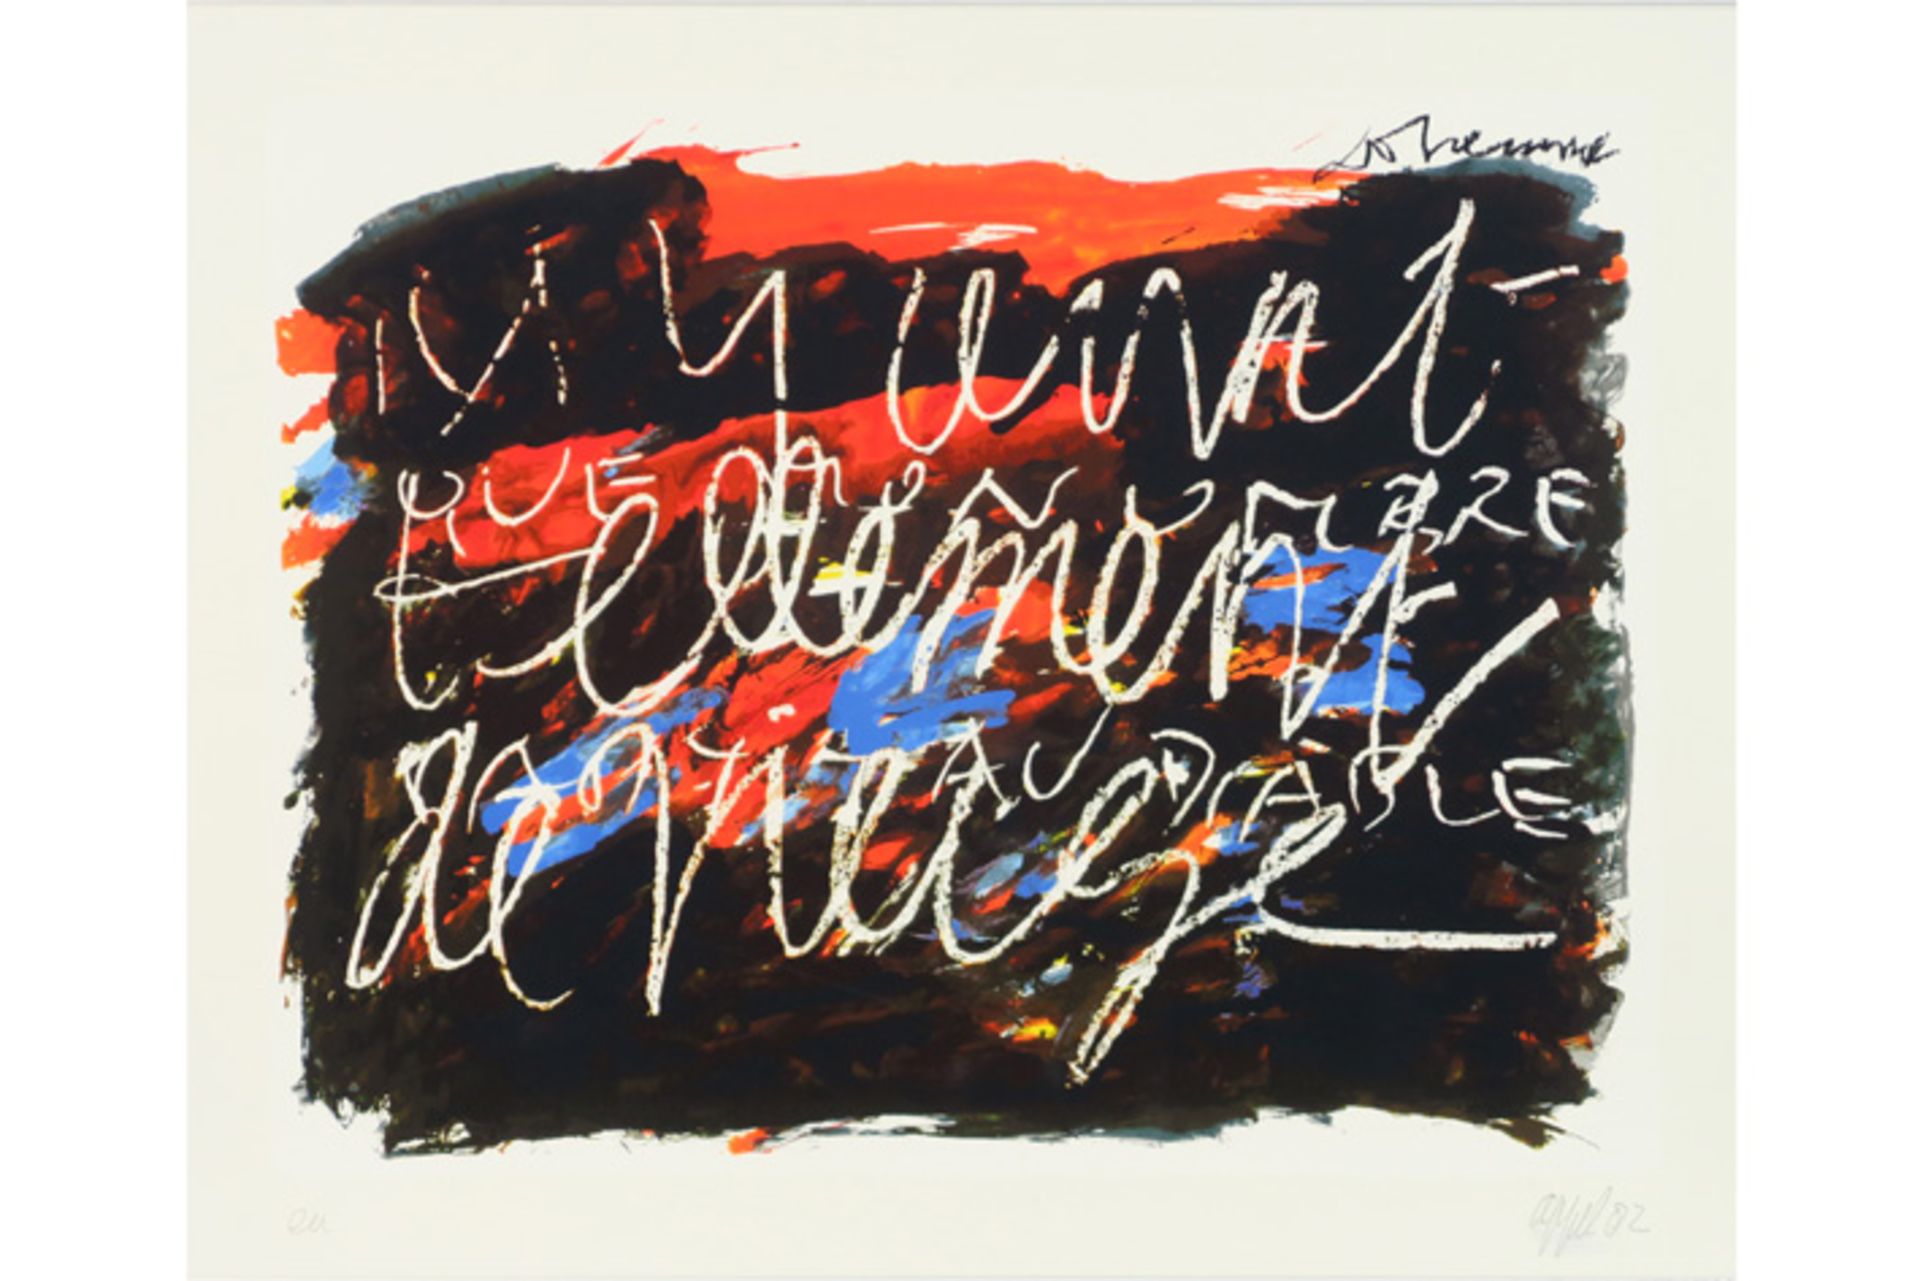 Karel Appel & Christian Dotremotn lithograph printed in colors from the portfolio "Duo pour un